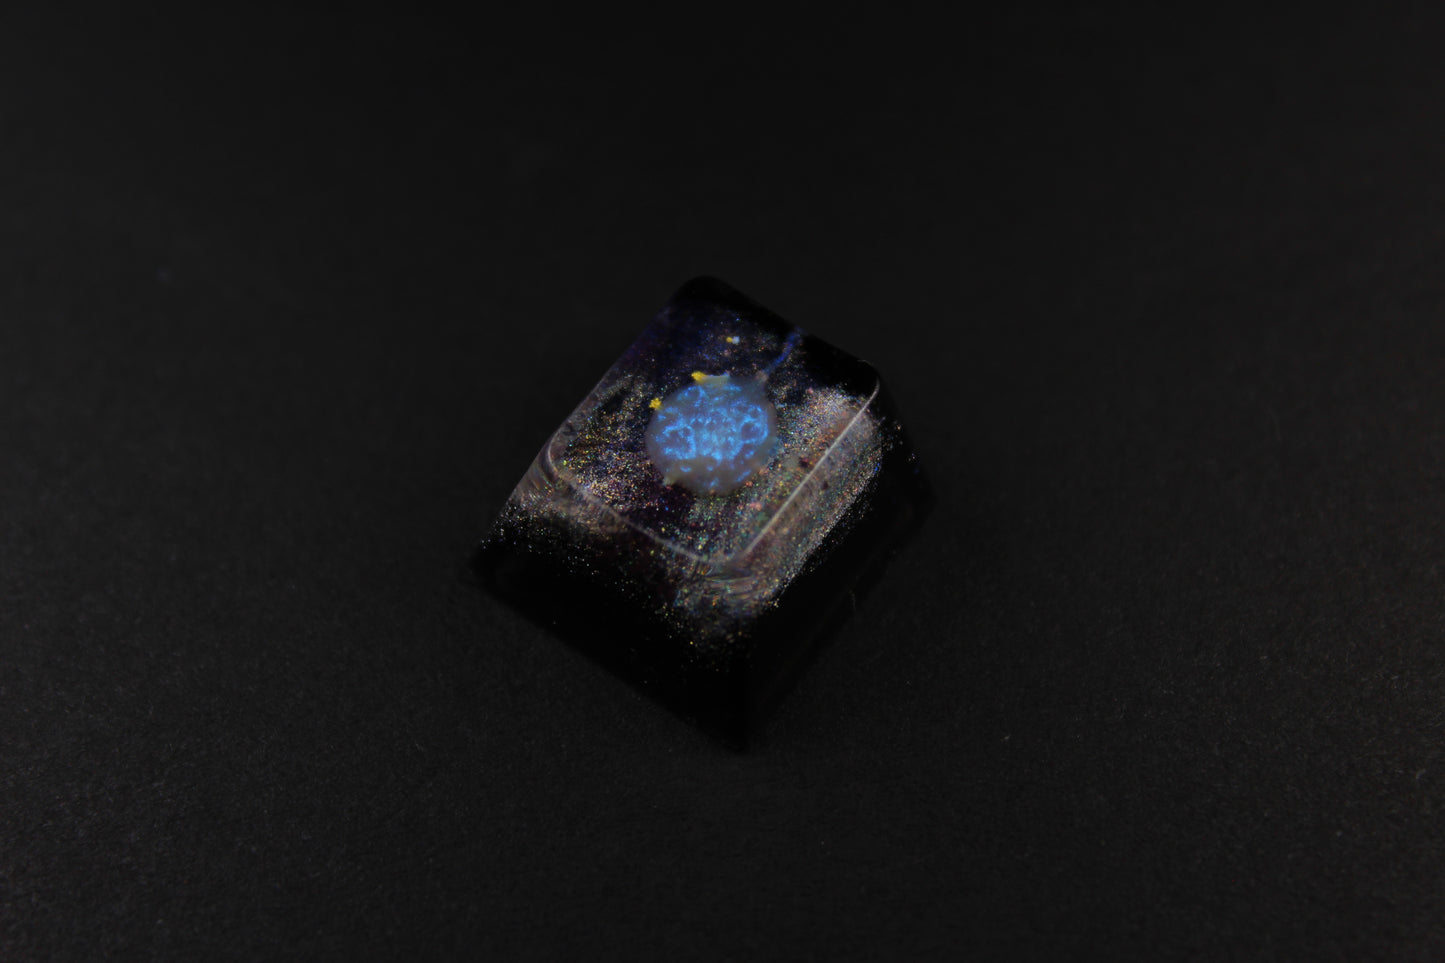 Cherry ESC - Event Horizon - PrimeCaps Keycap - Blank and Sculpted Artisan Keycaps for cherry MX mechanical keyboards 